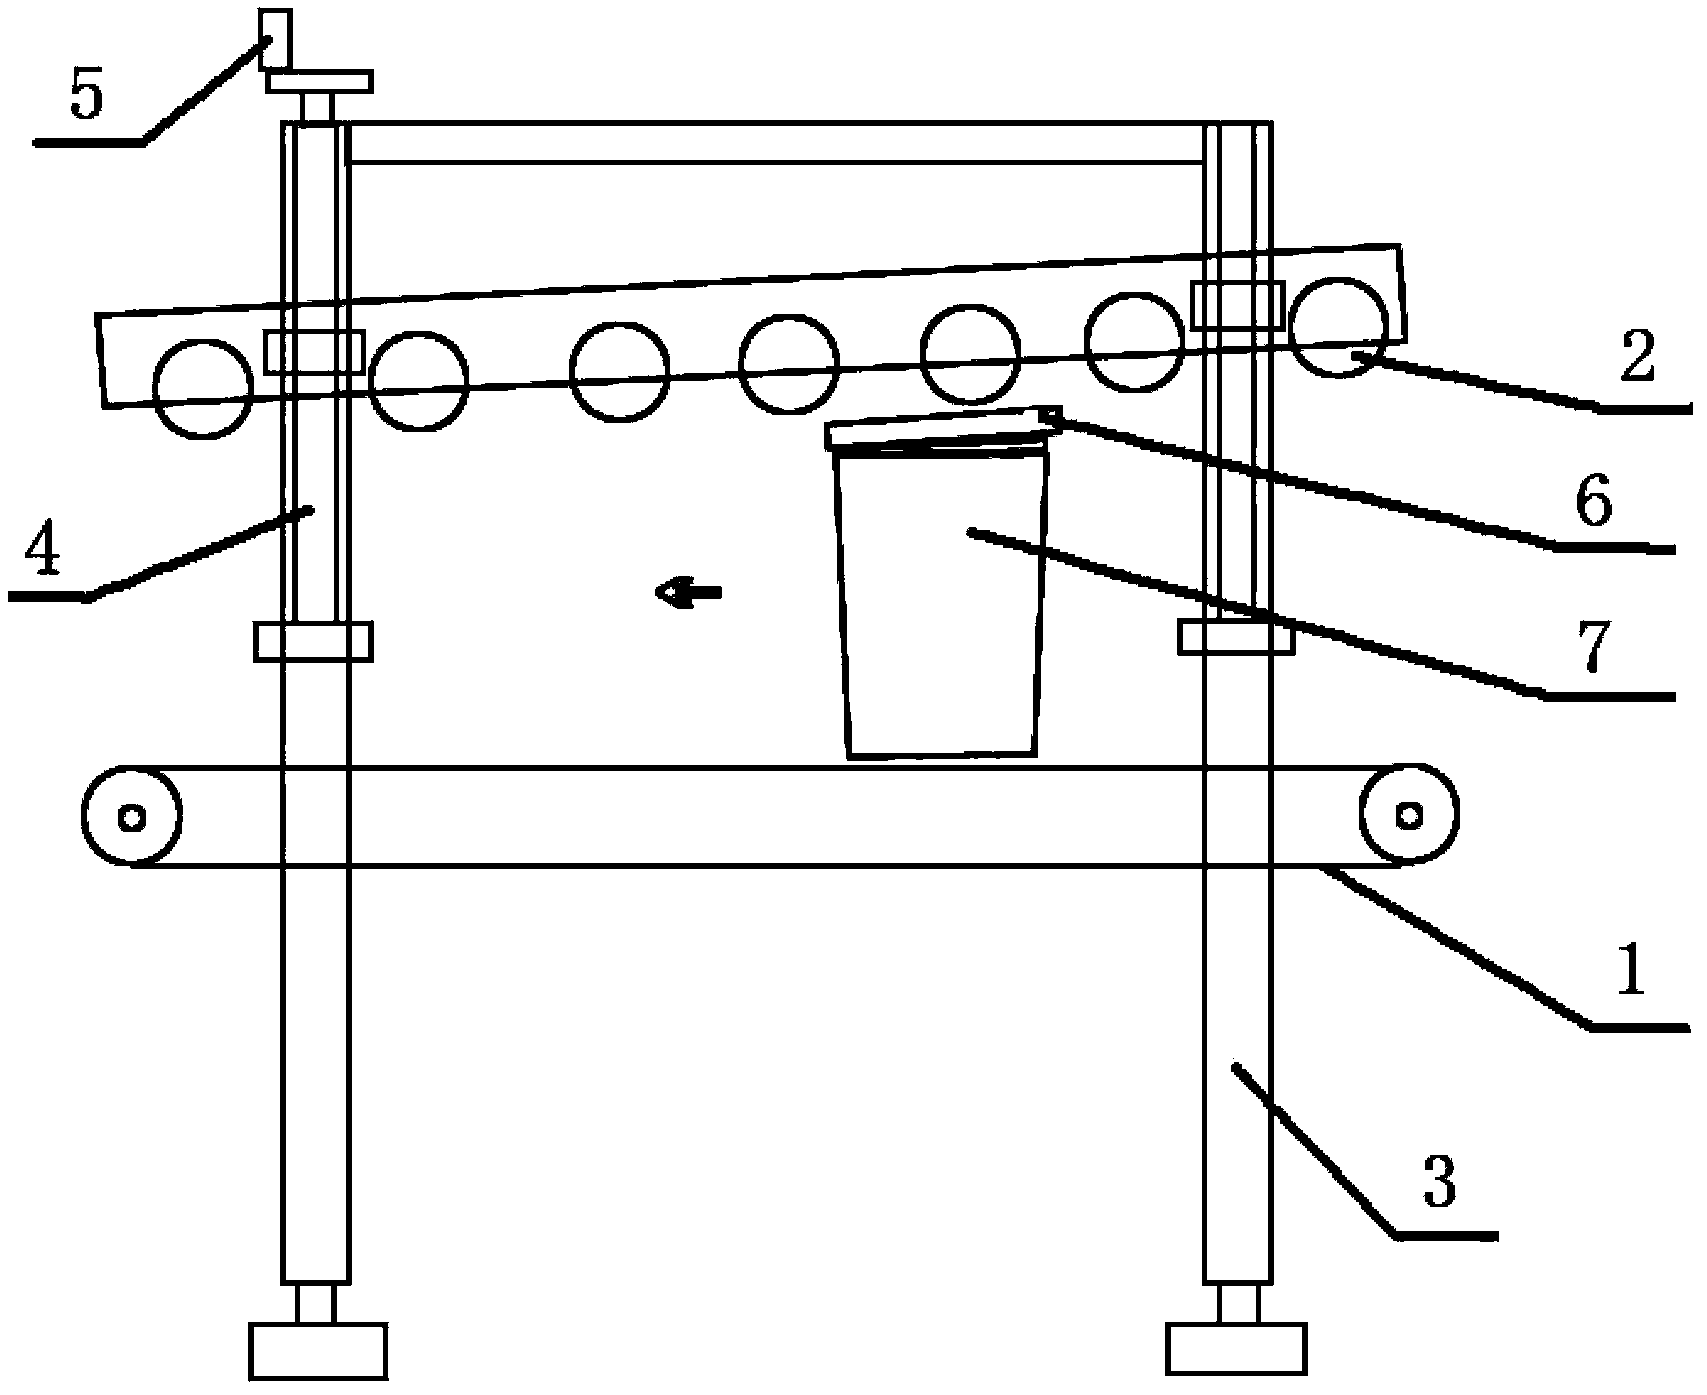 Lid-pressing device